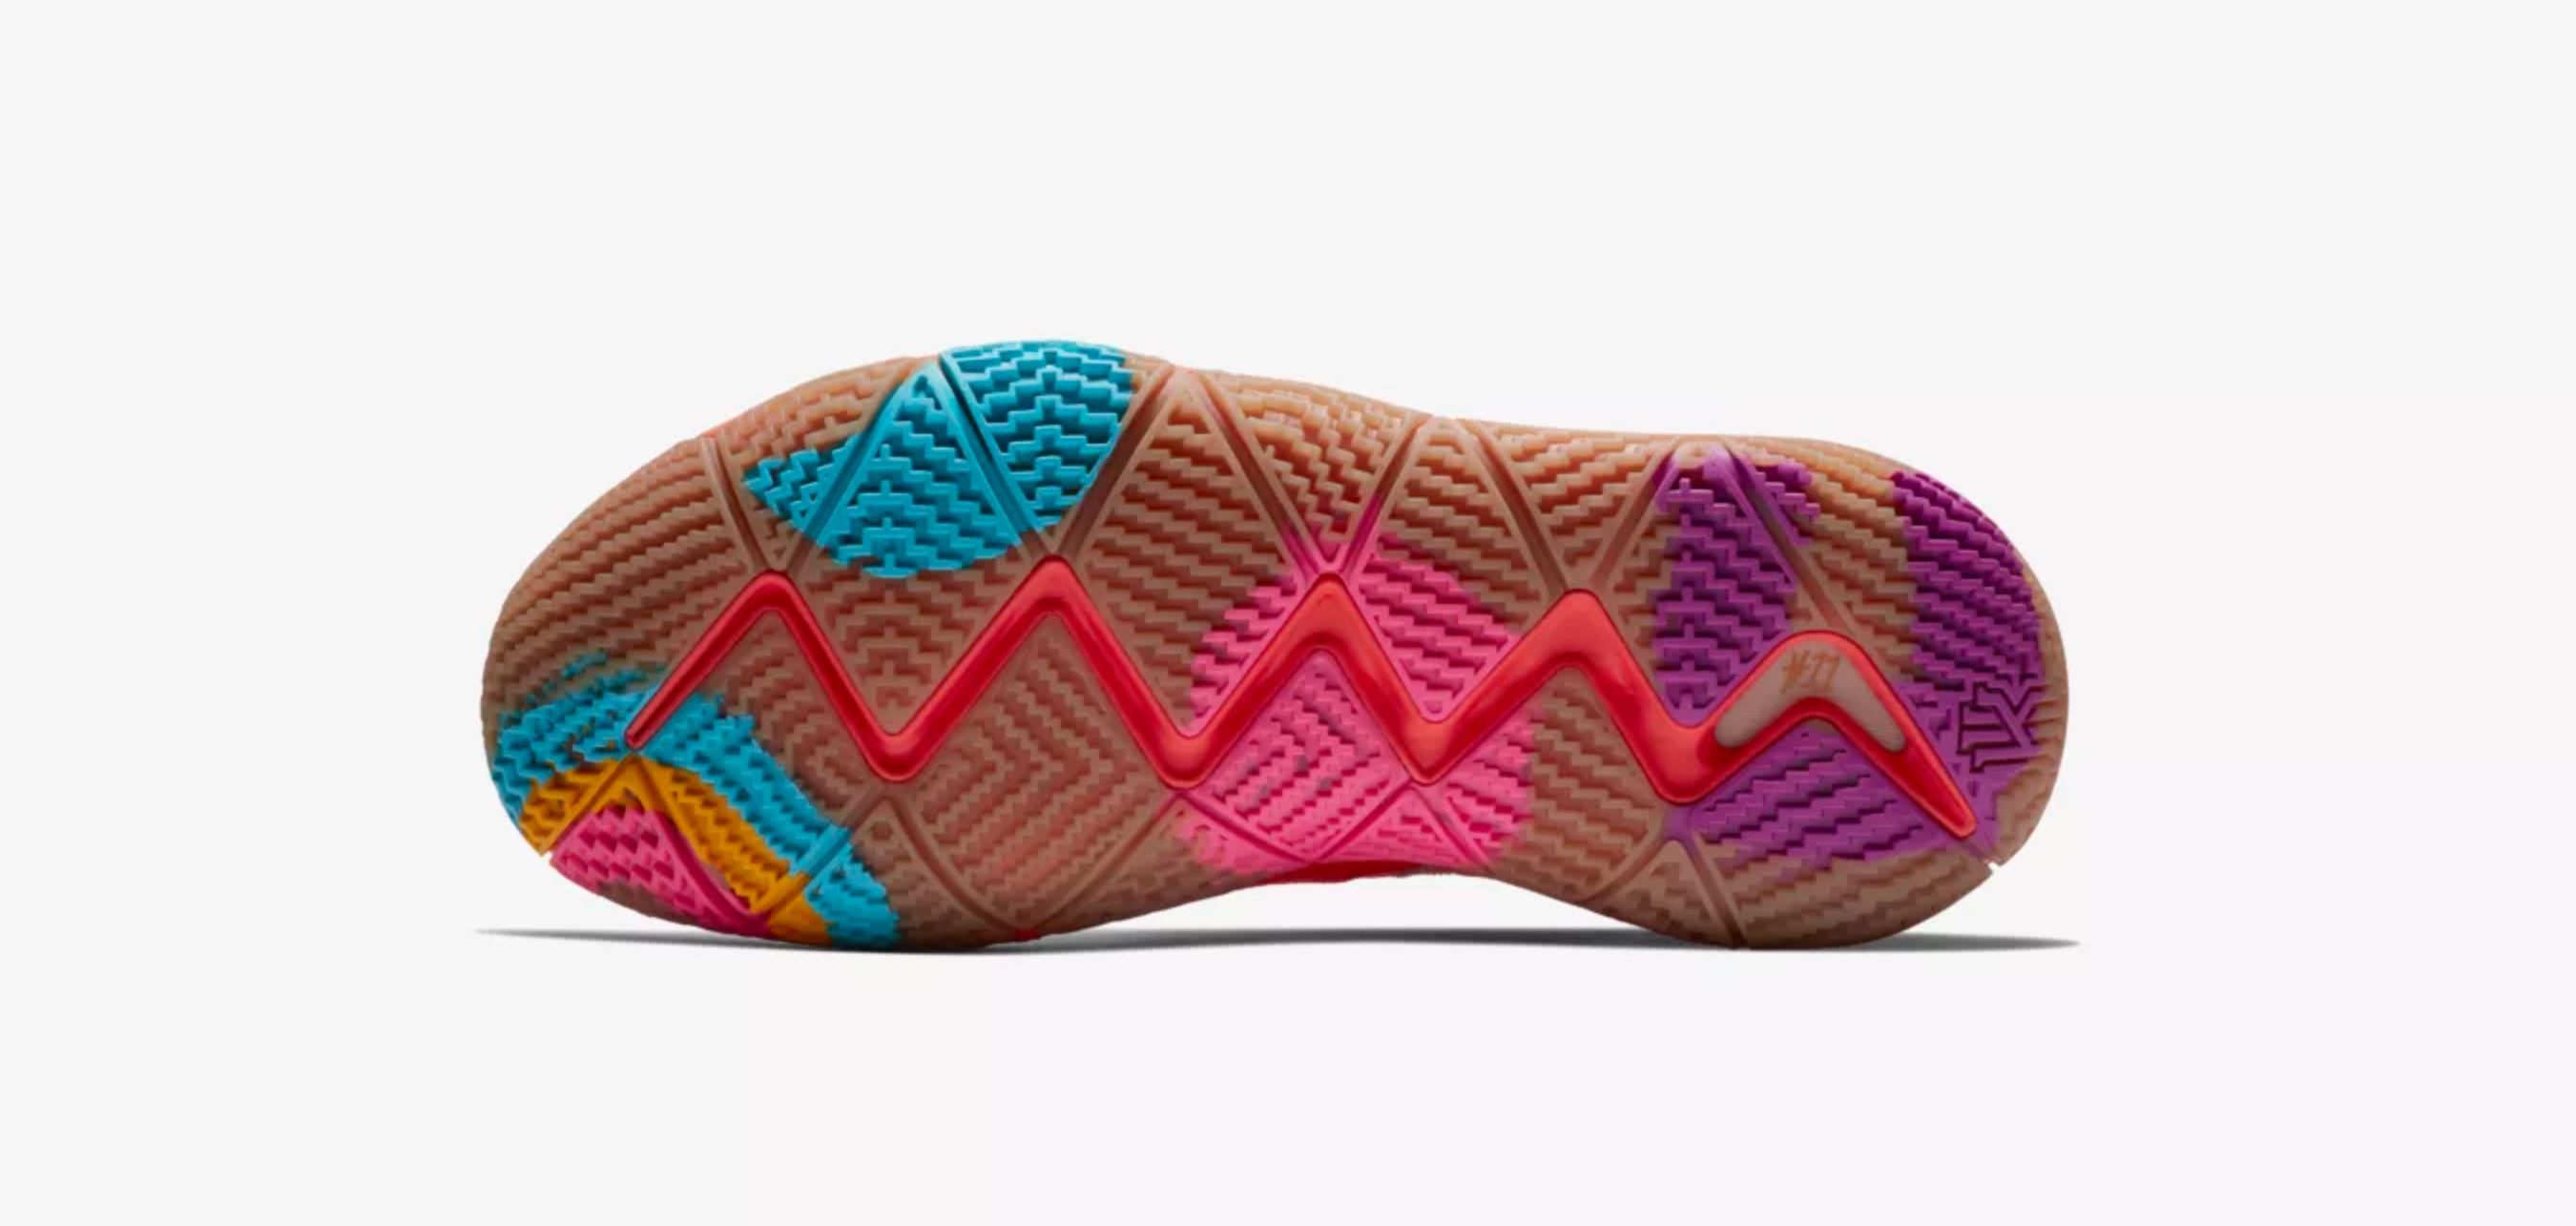 kyrie 4 insole